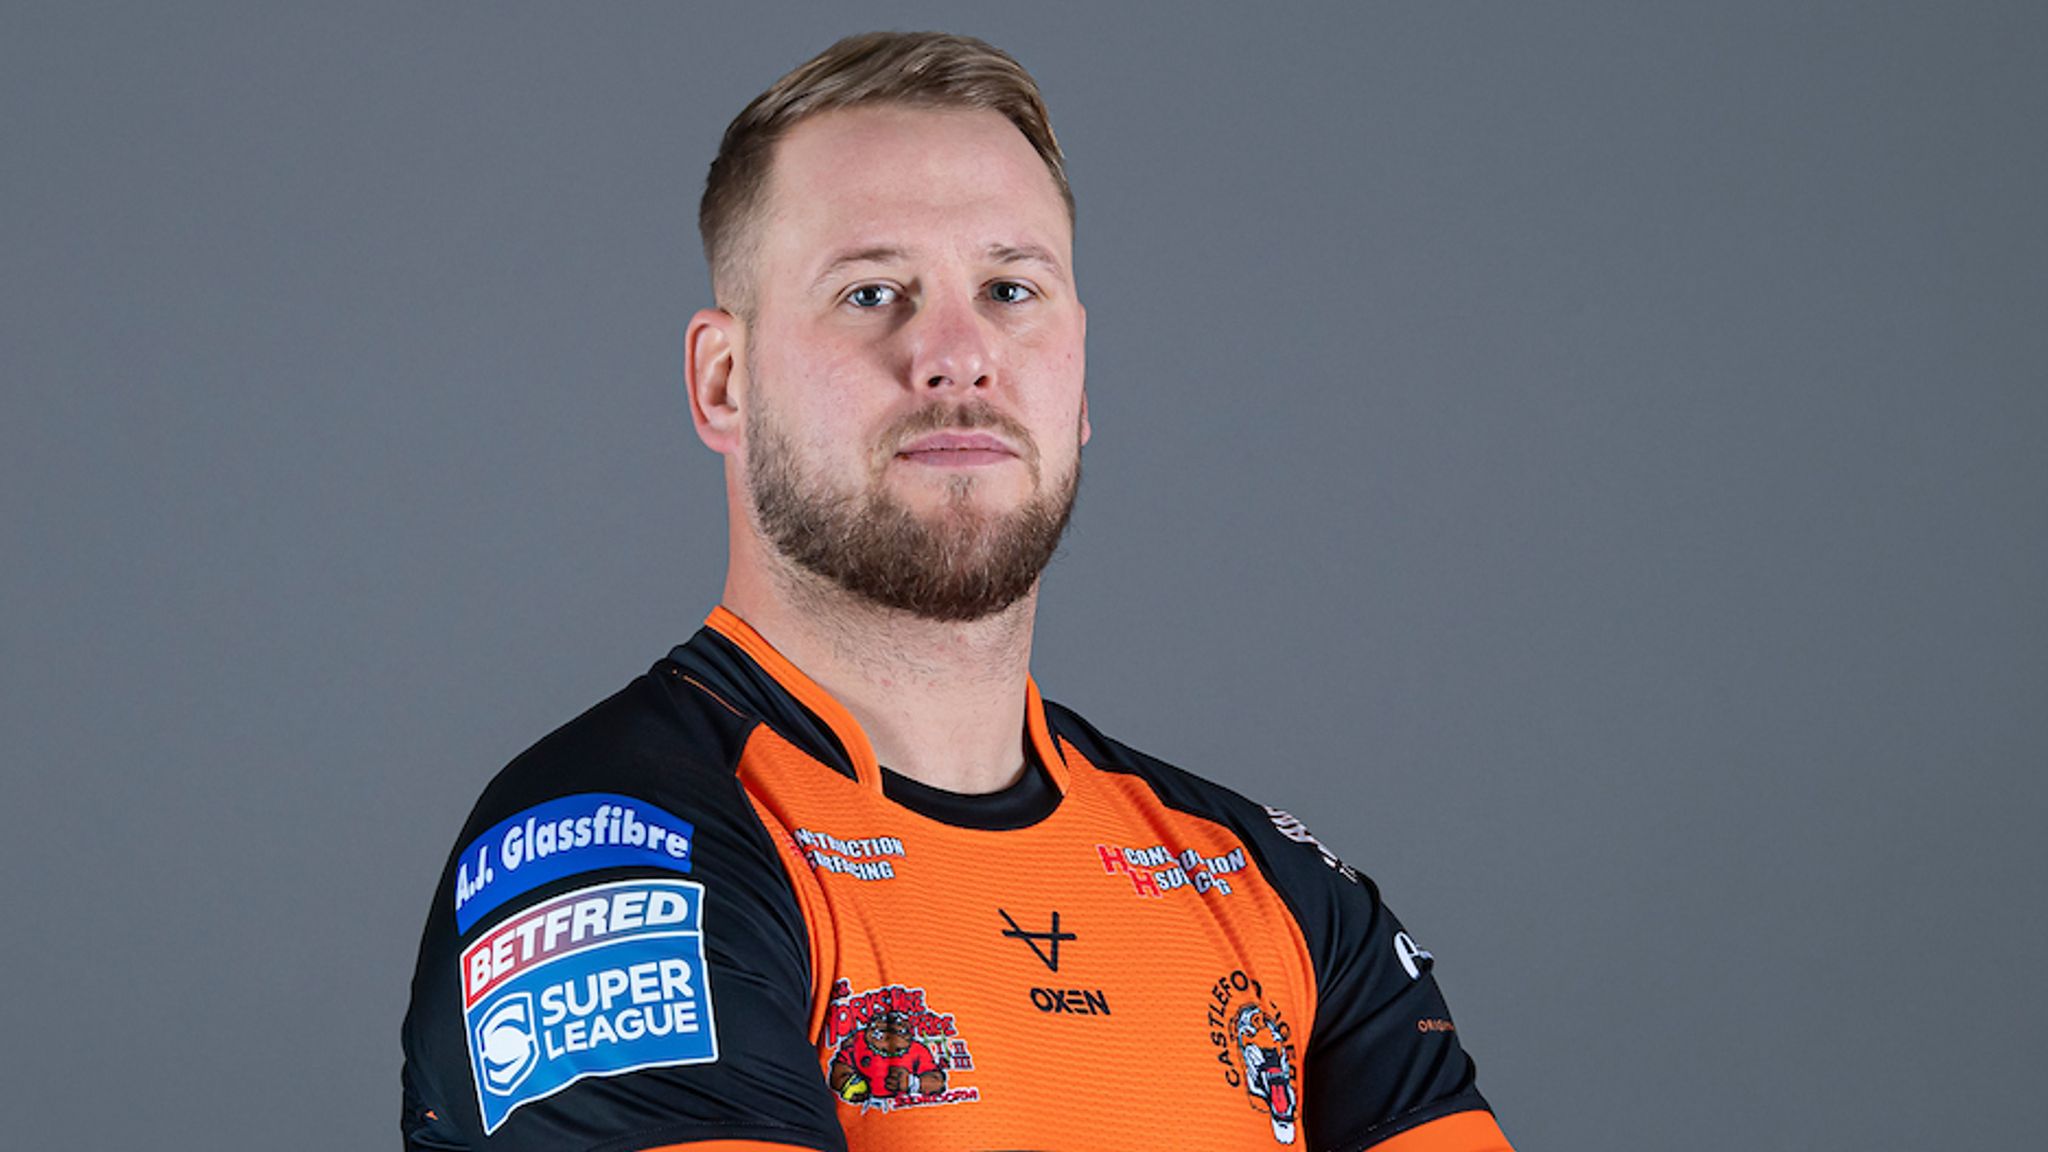 Joe Westerman Castleford Tigers fine player after video emerges of act in alley Rugby League News Sky Sports